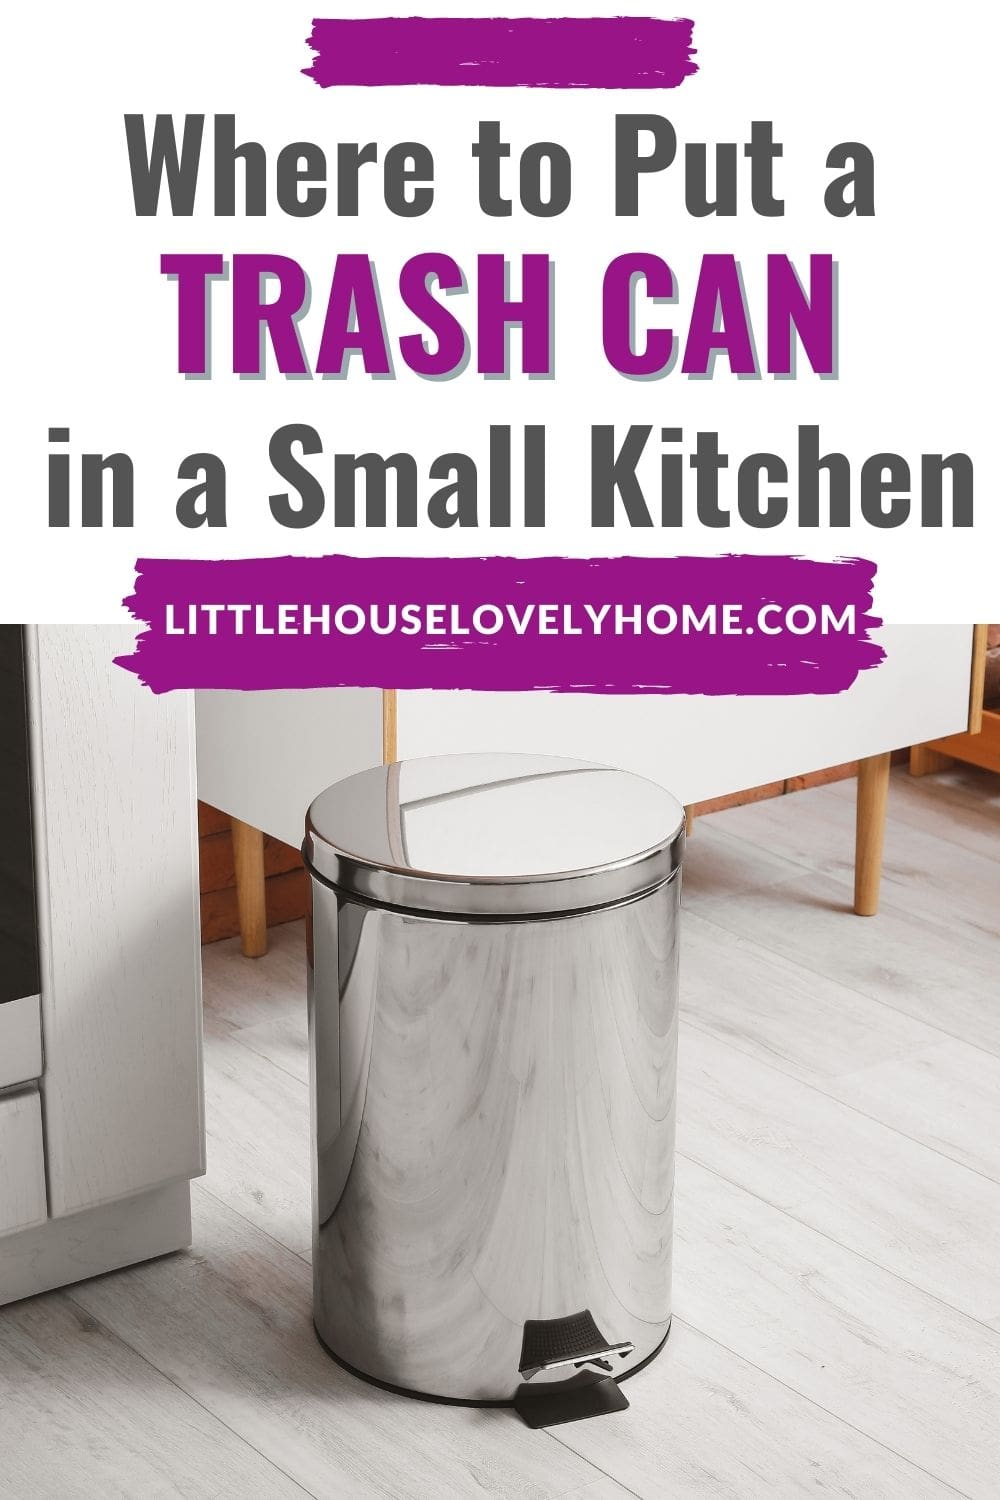 Picture of a trash can with a text overlay that reads where to put a trash can in a small kitchen